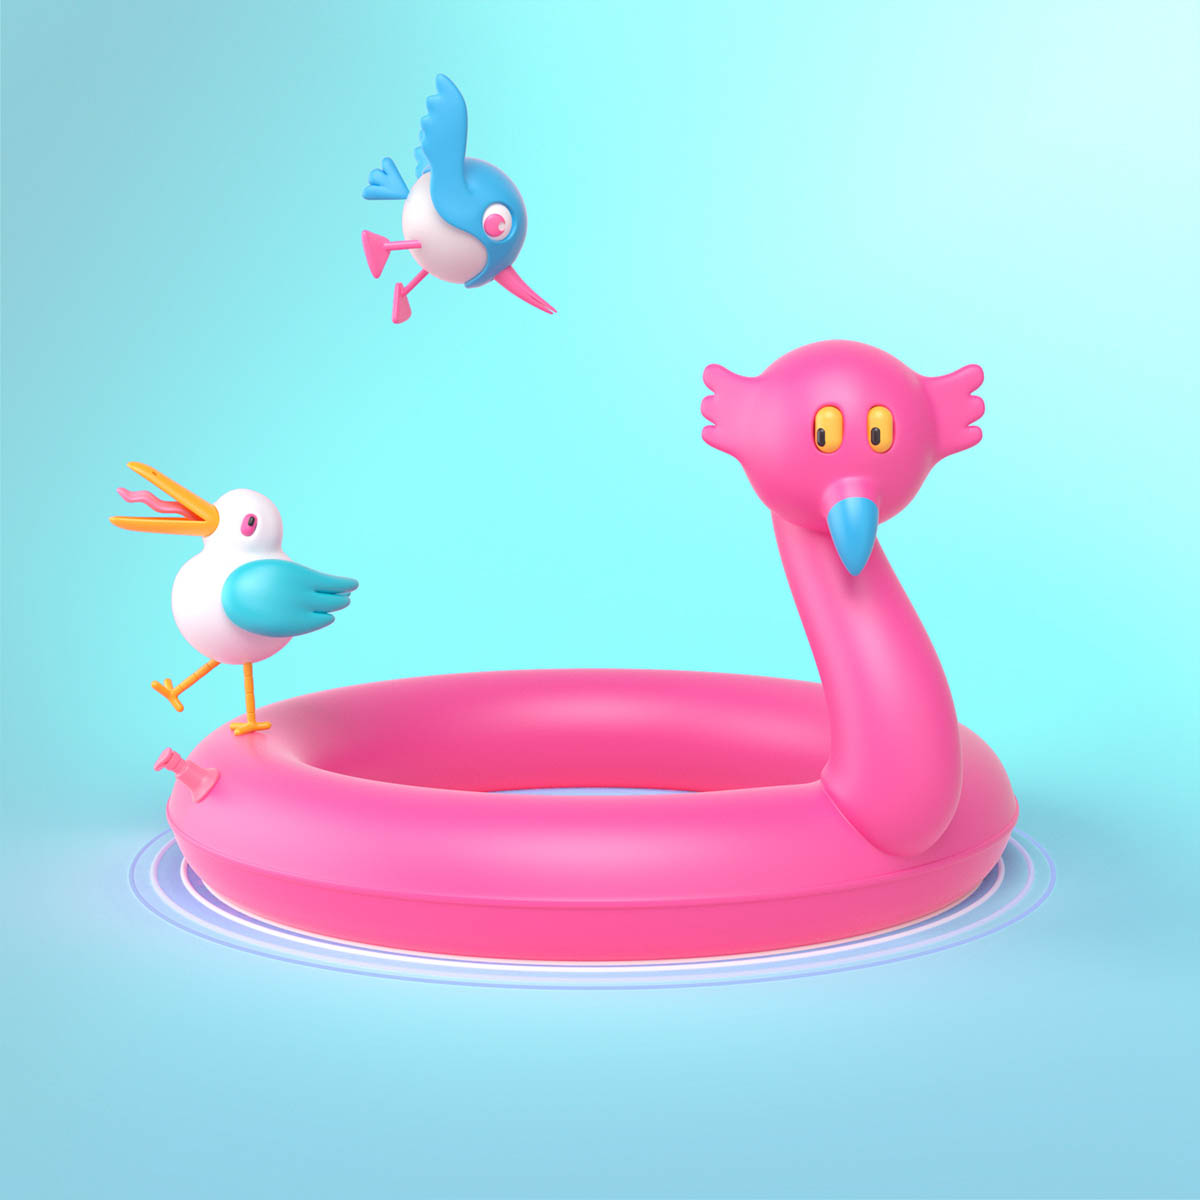 duck 3d models by nikopicto